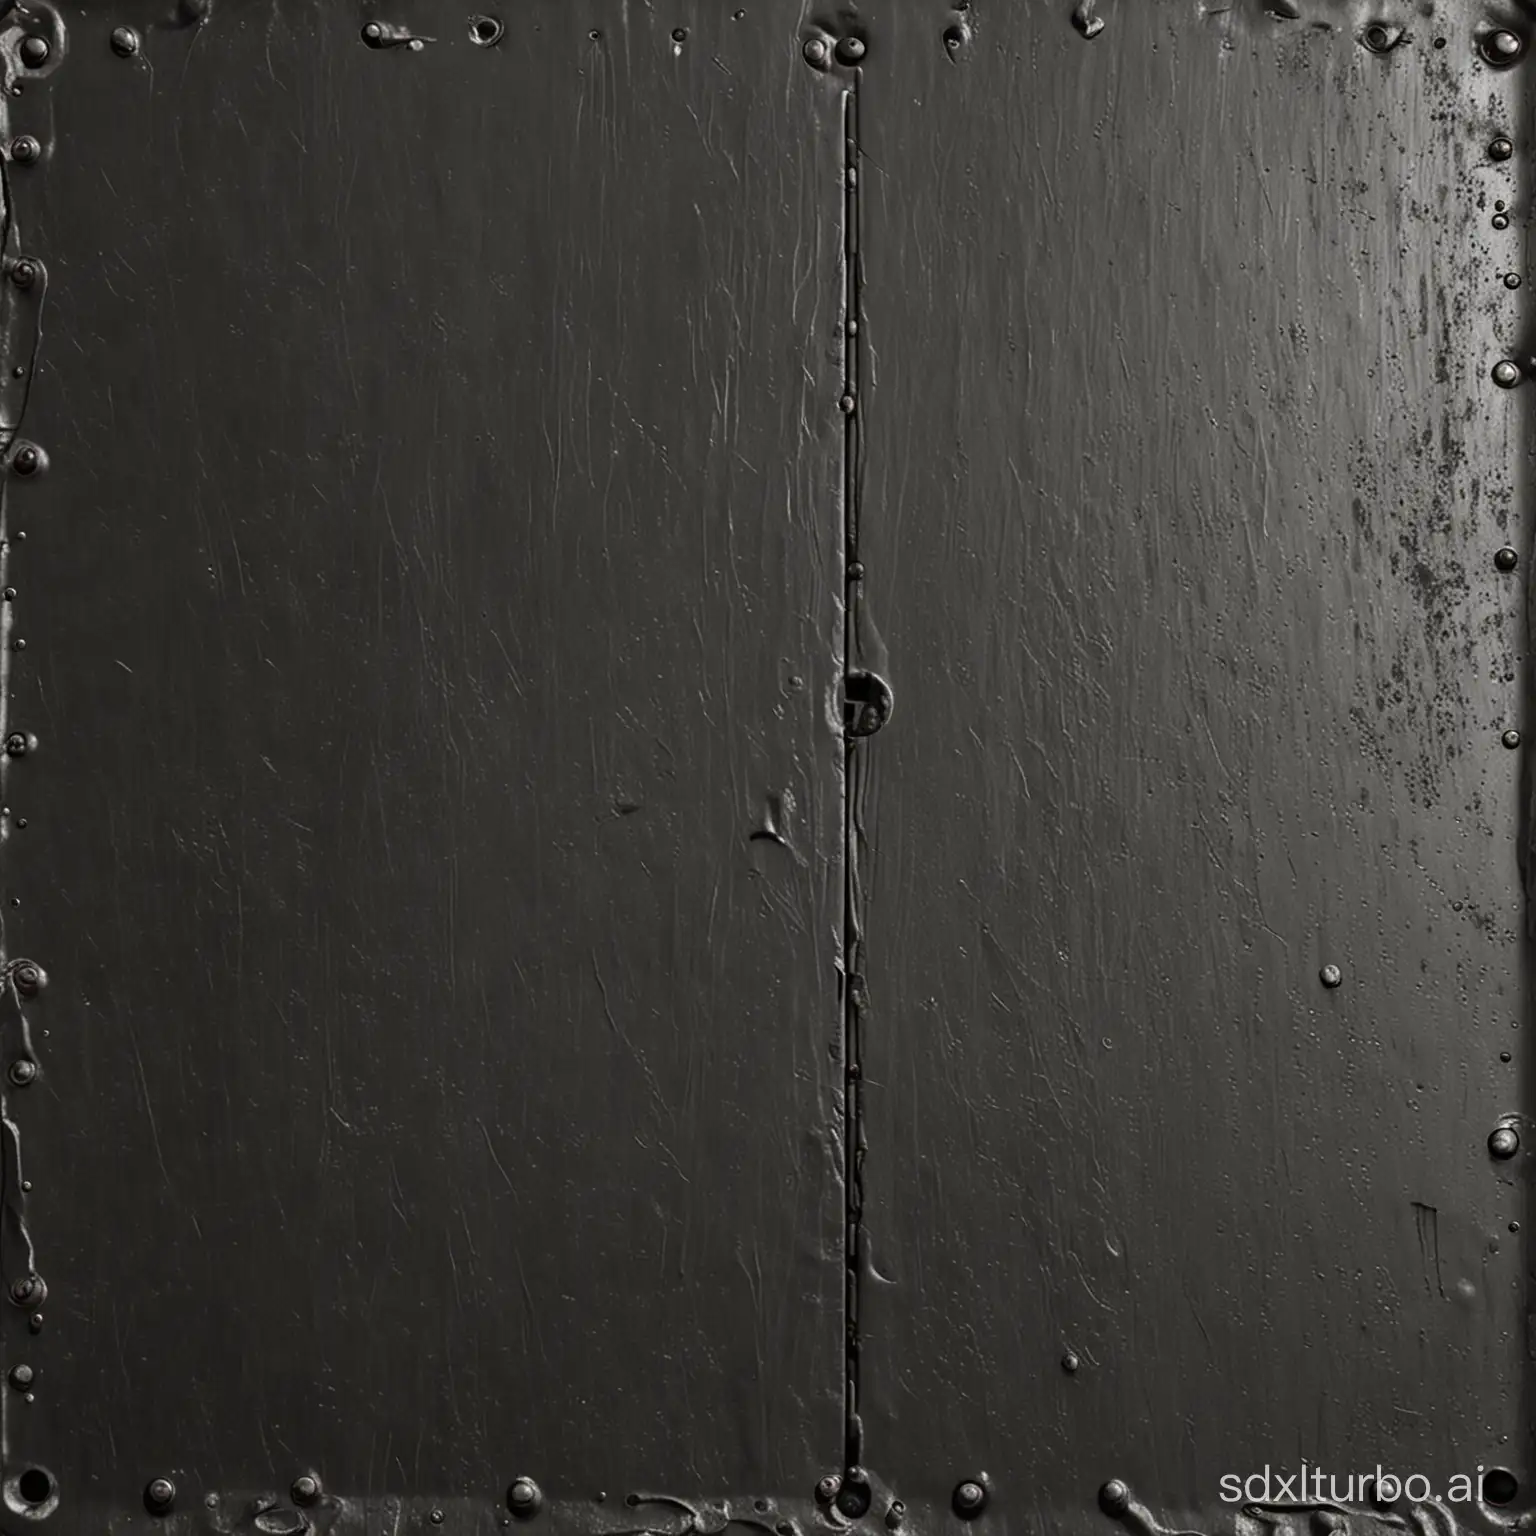 dark washed out metal plates texture assets